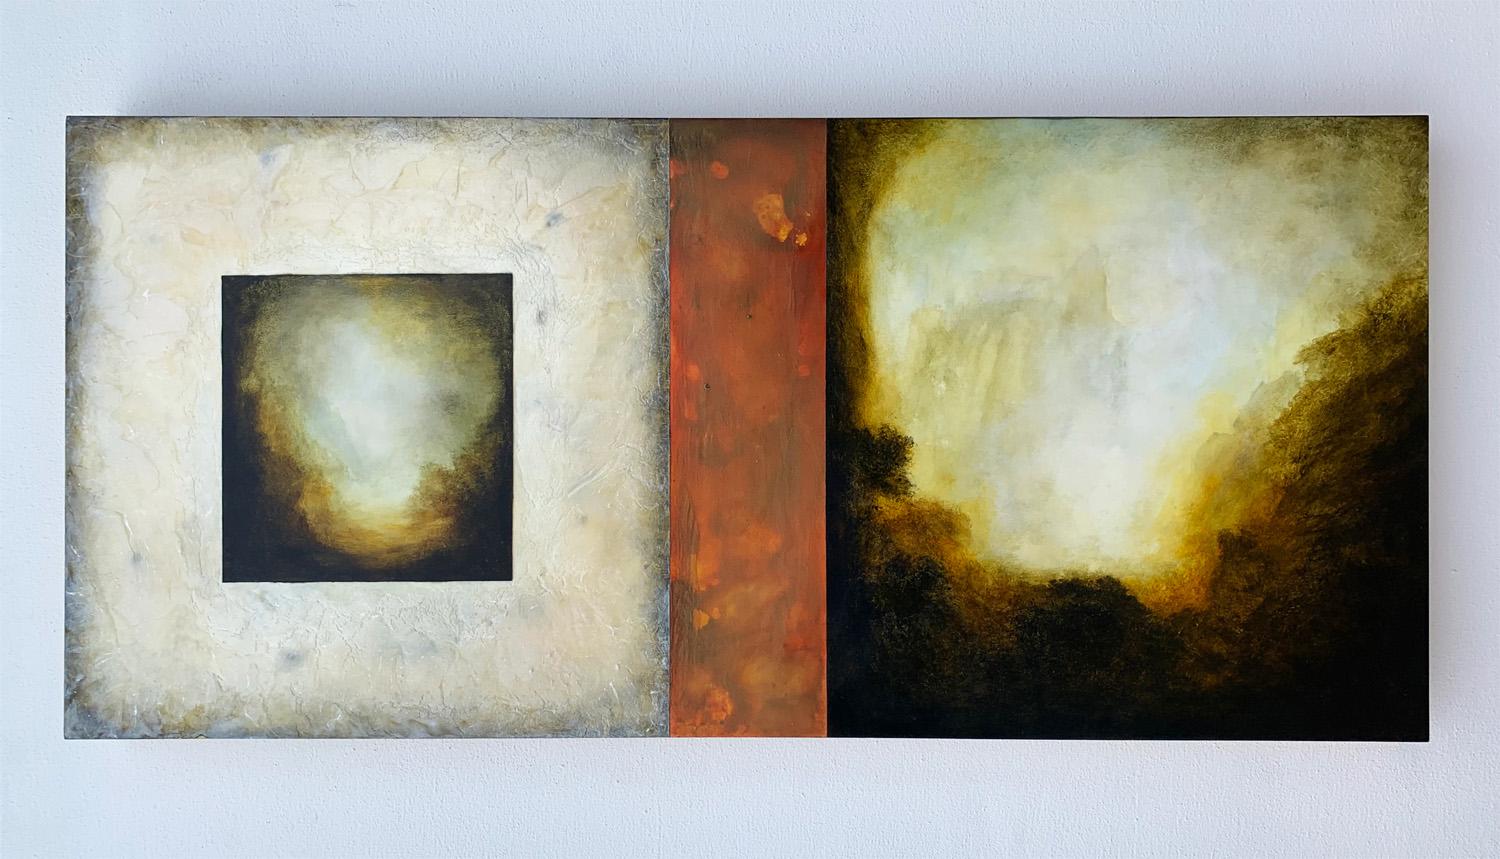 <p>Artist Comments<br />A sophisticated, dreamlike view of two distant landscapes, framed and bordered in abstraction. Candice says she developed a unique acrylic/encaustic technique for this work, as seen in the white area. The red area also